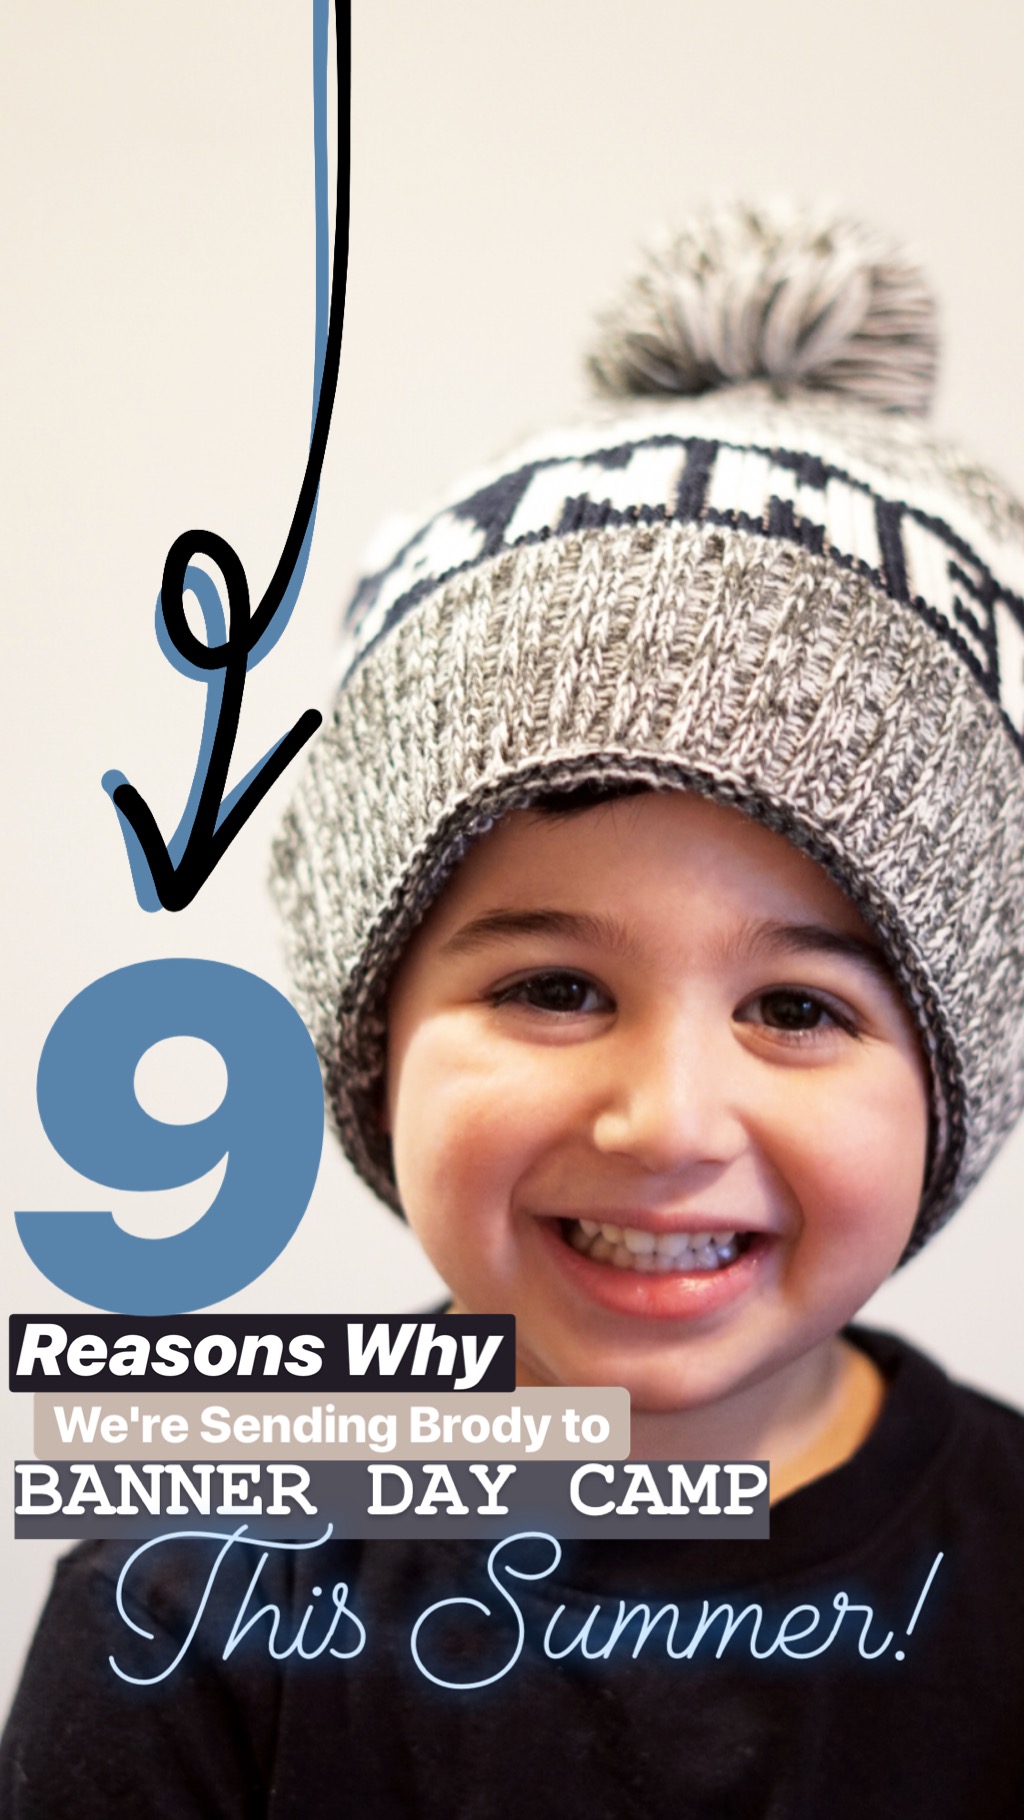 9 Reasons Why We're Sending Brody to Banner Day Camp This Summer :: I Adore What I Love Blog :: www.iadorewhatilove.com #iadorewhatilove